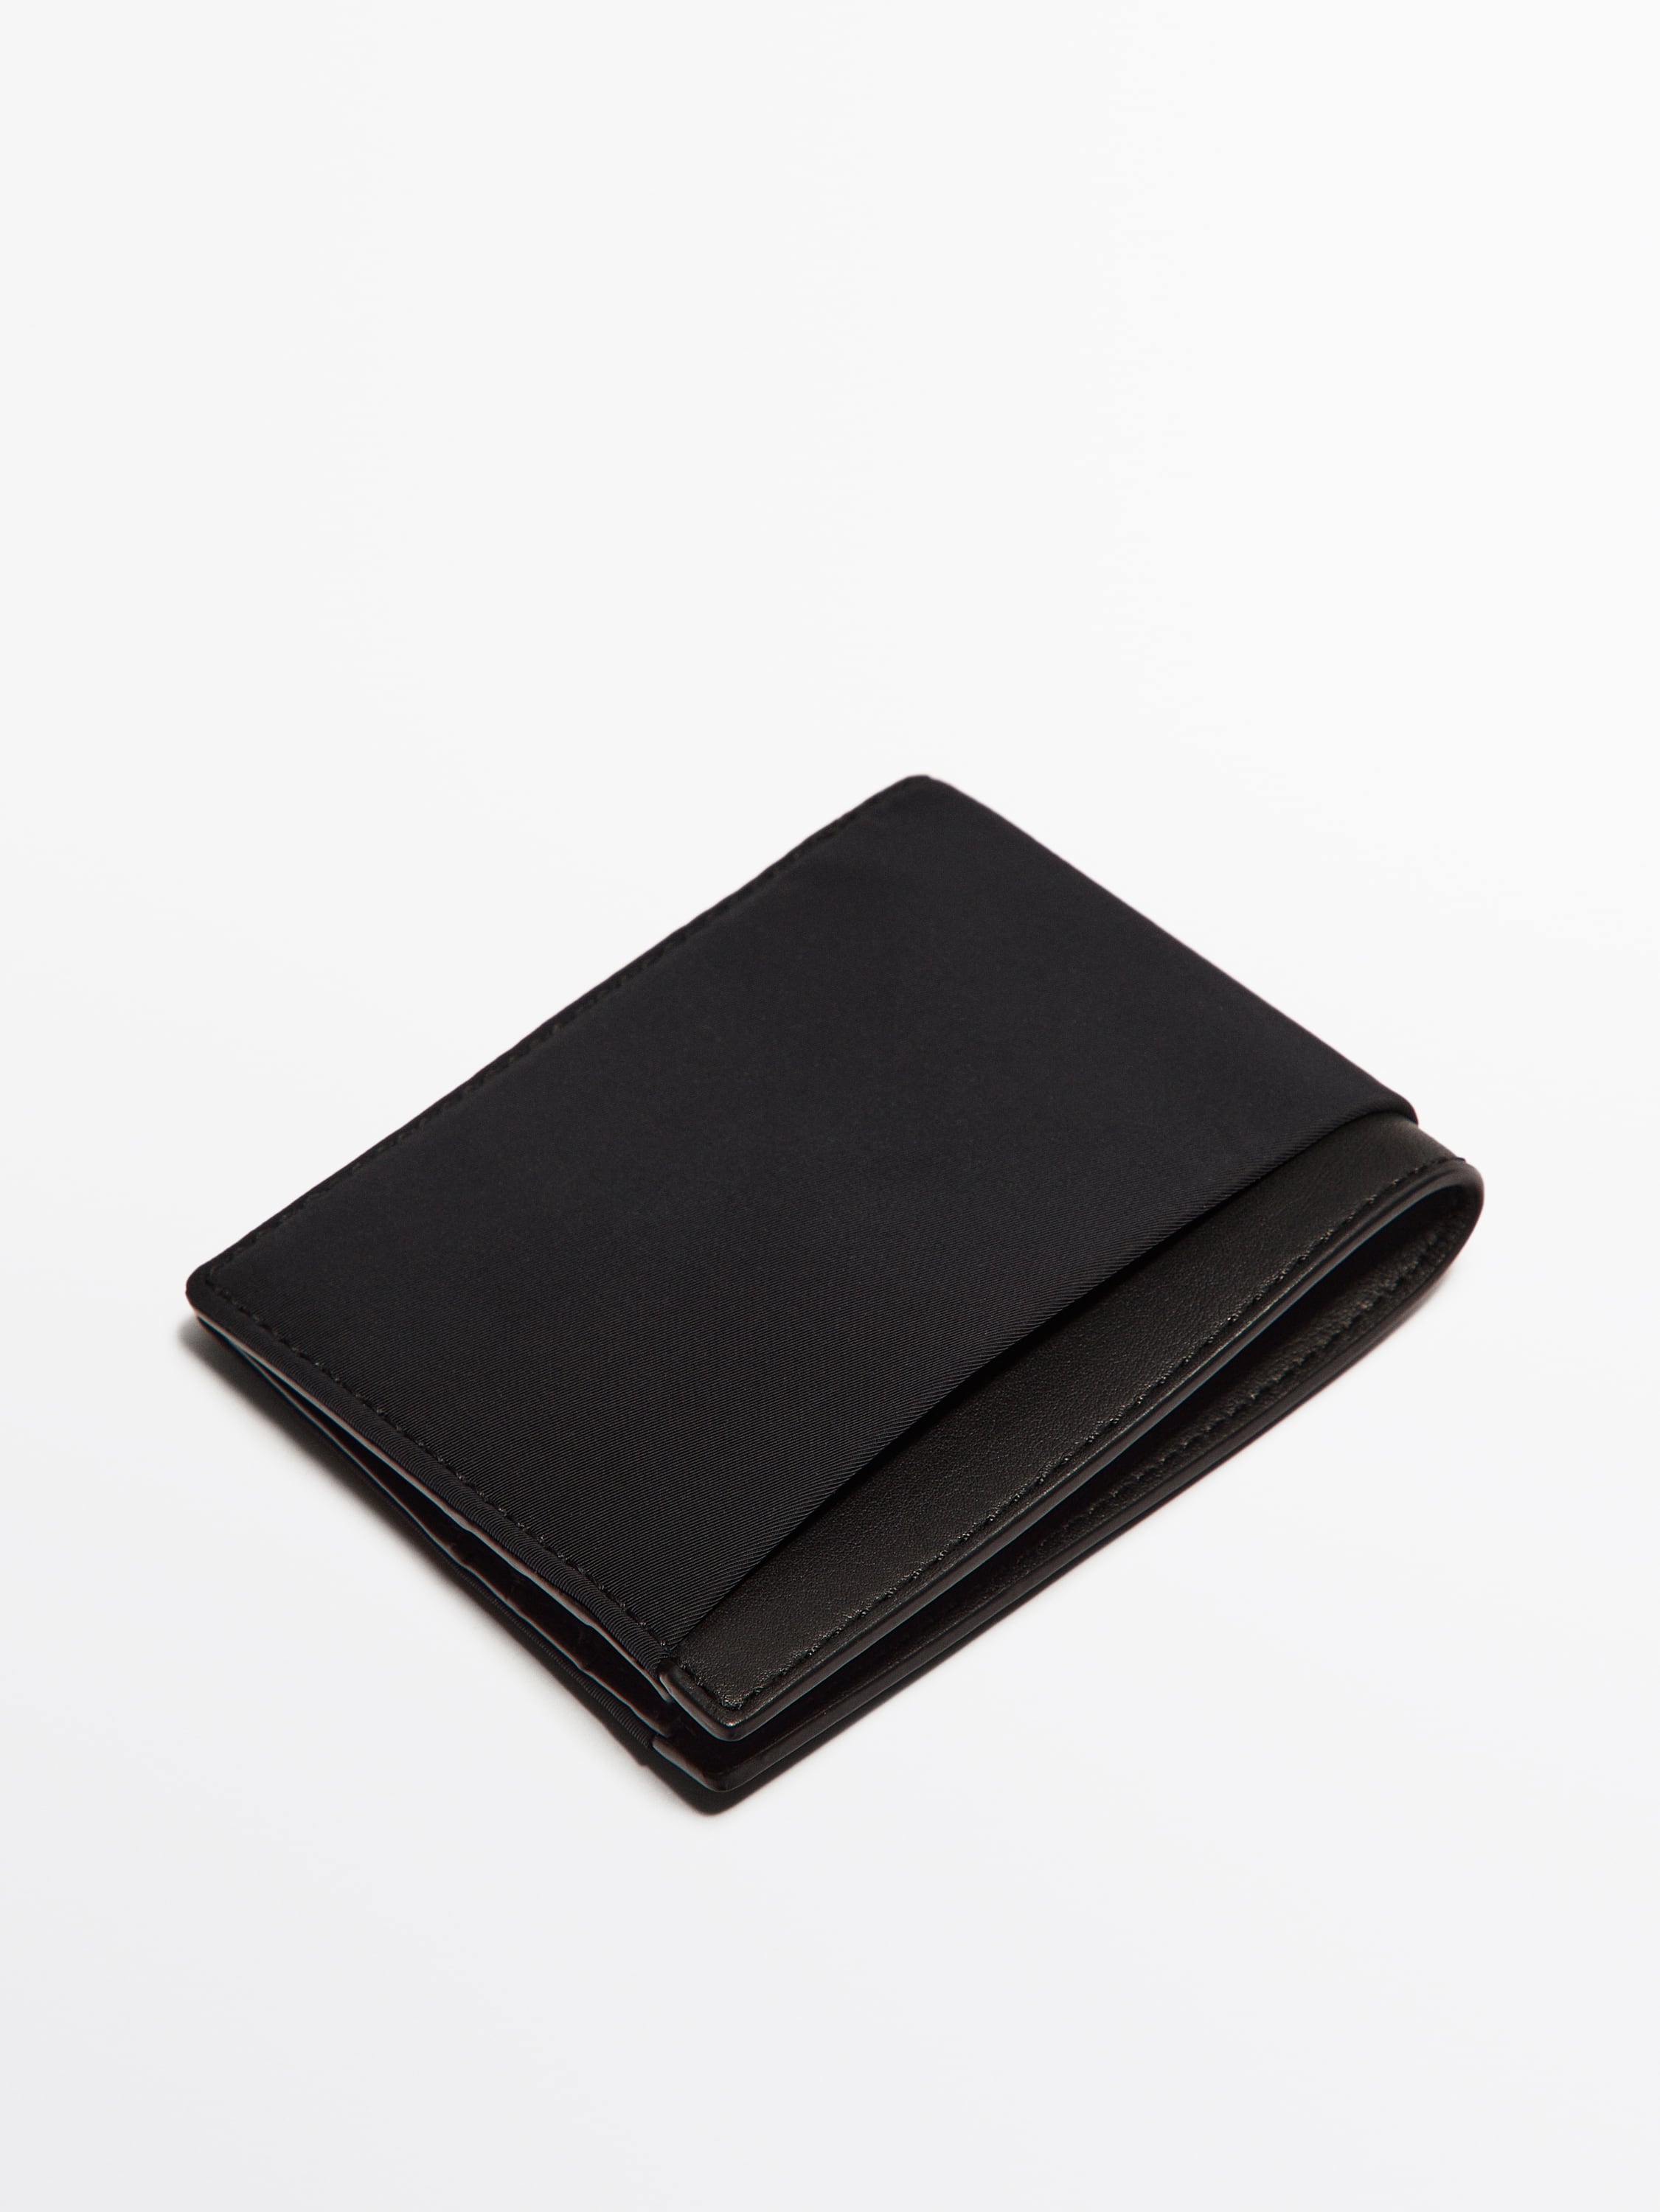 Contrast nylon wallet with leather details - Studio